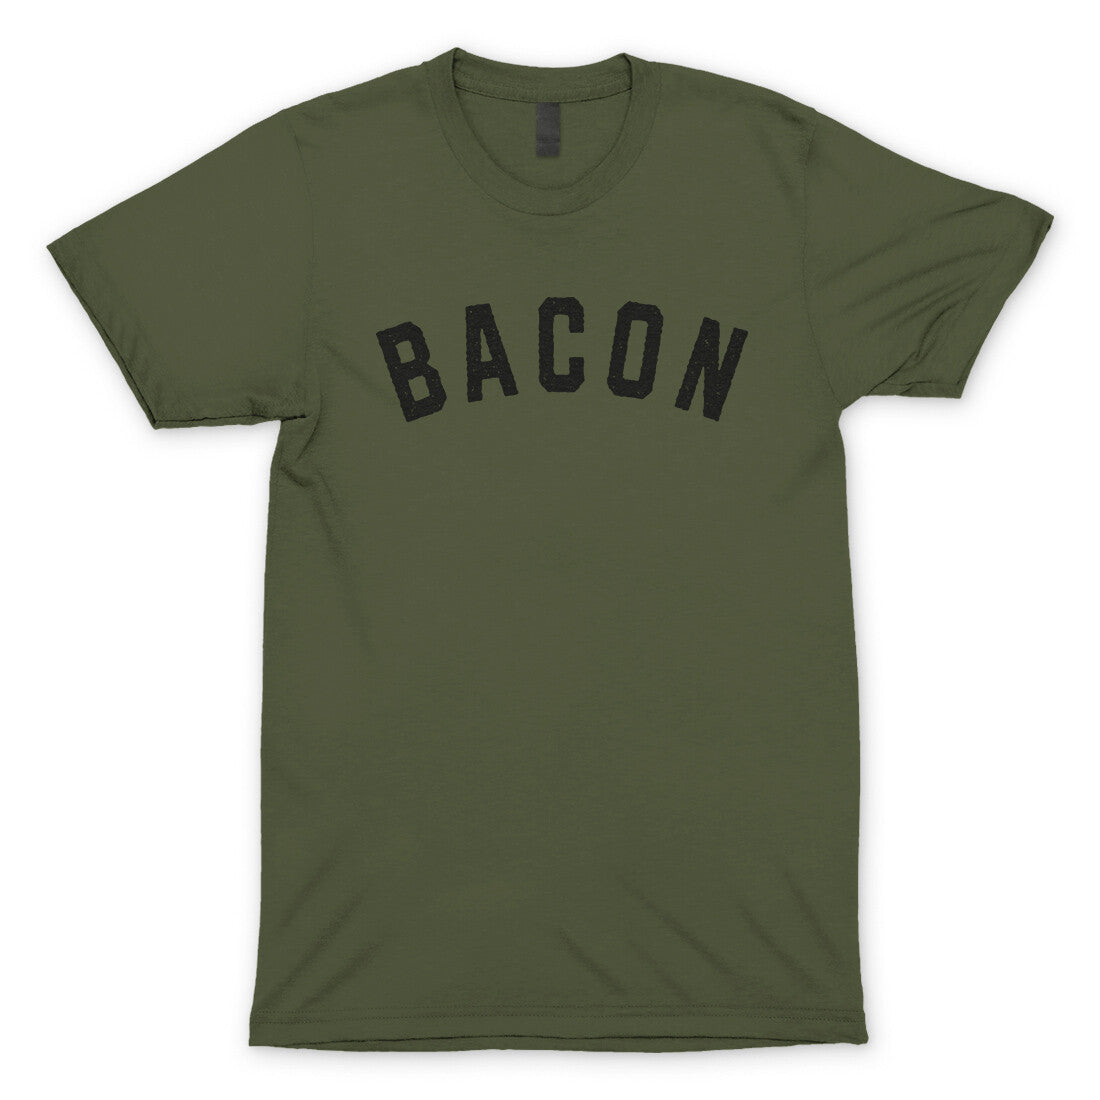 Bacon in Military Green Color